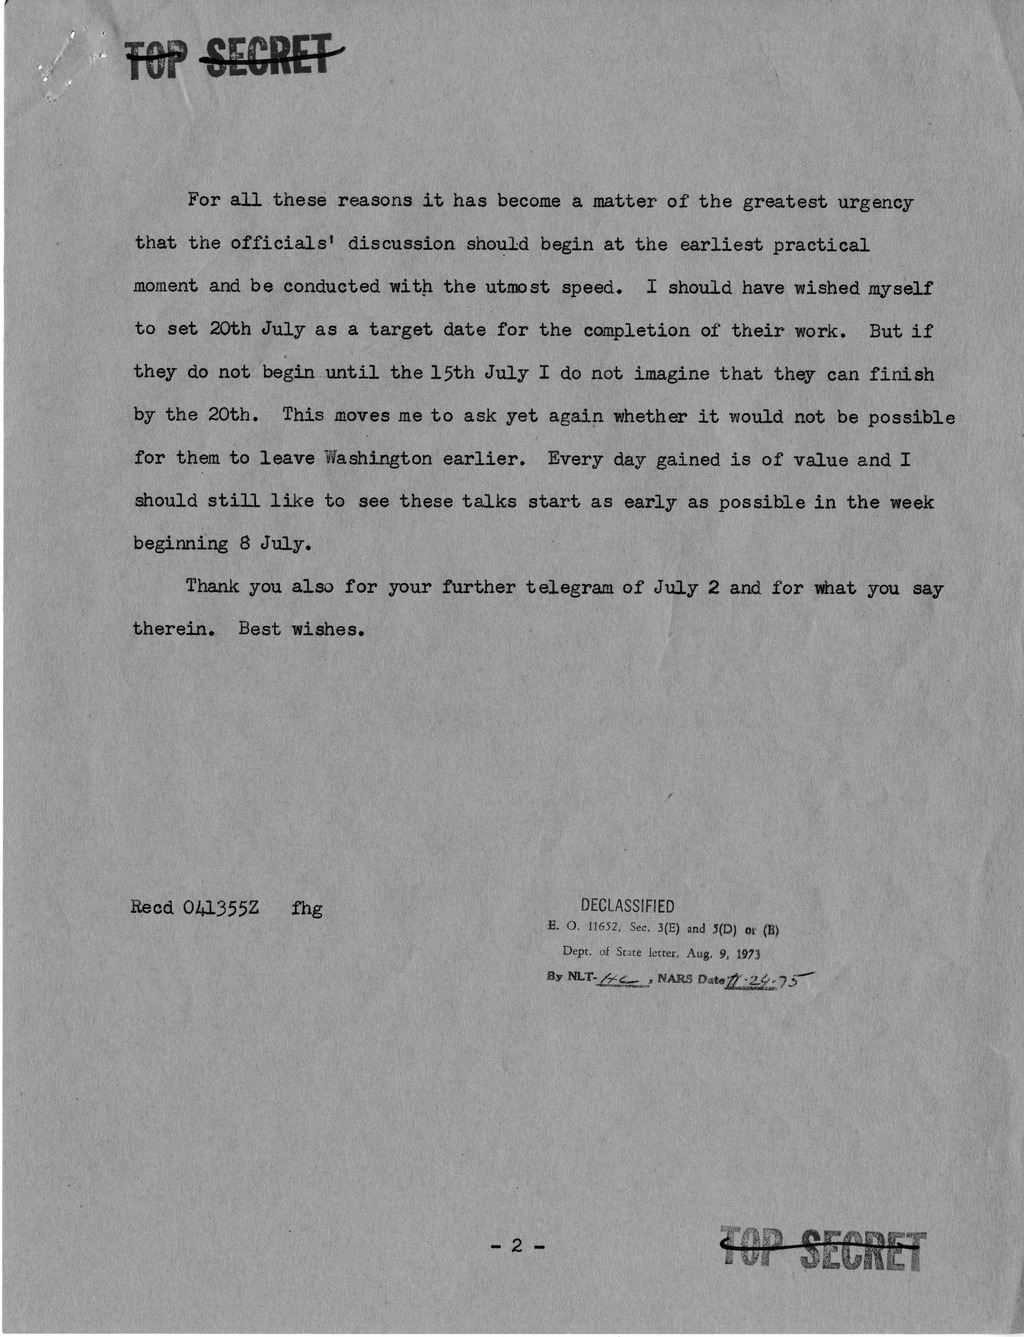 Memorandum from Prime Minister Clement Attlee to President Harry S. Truman with Attachment